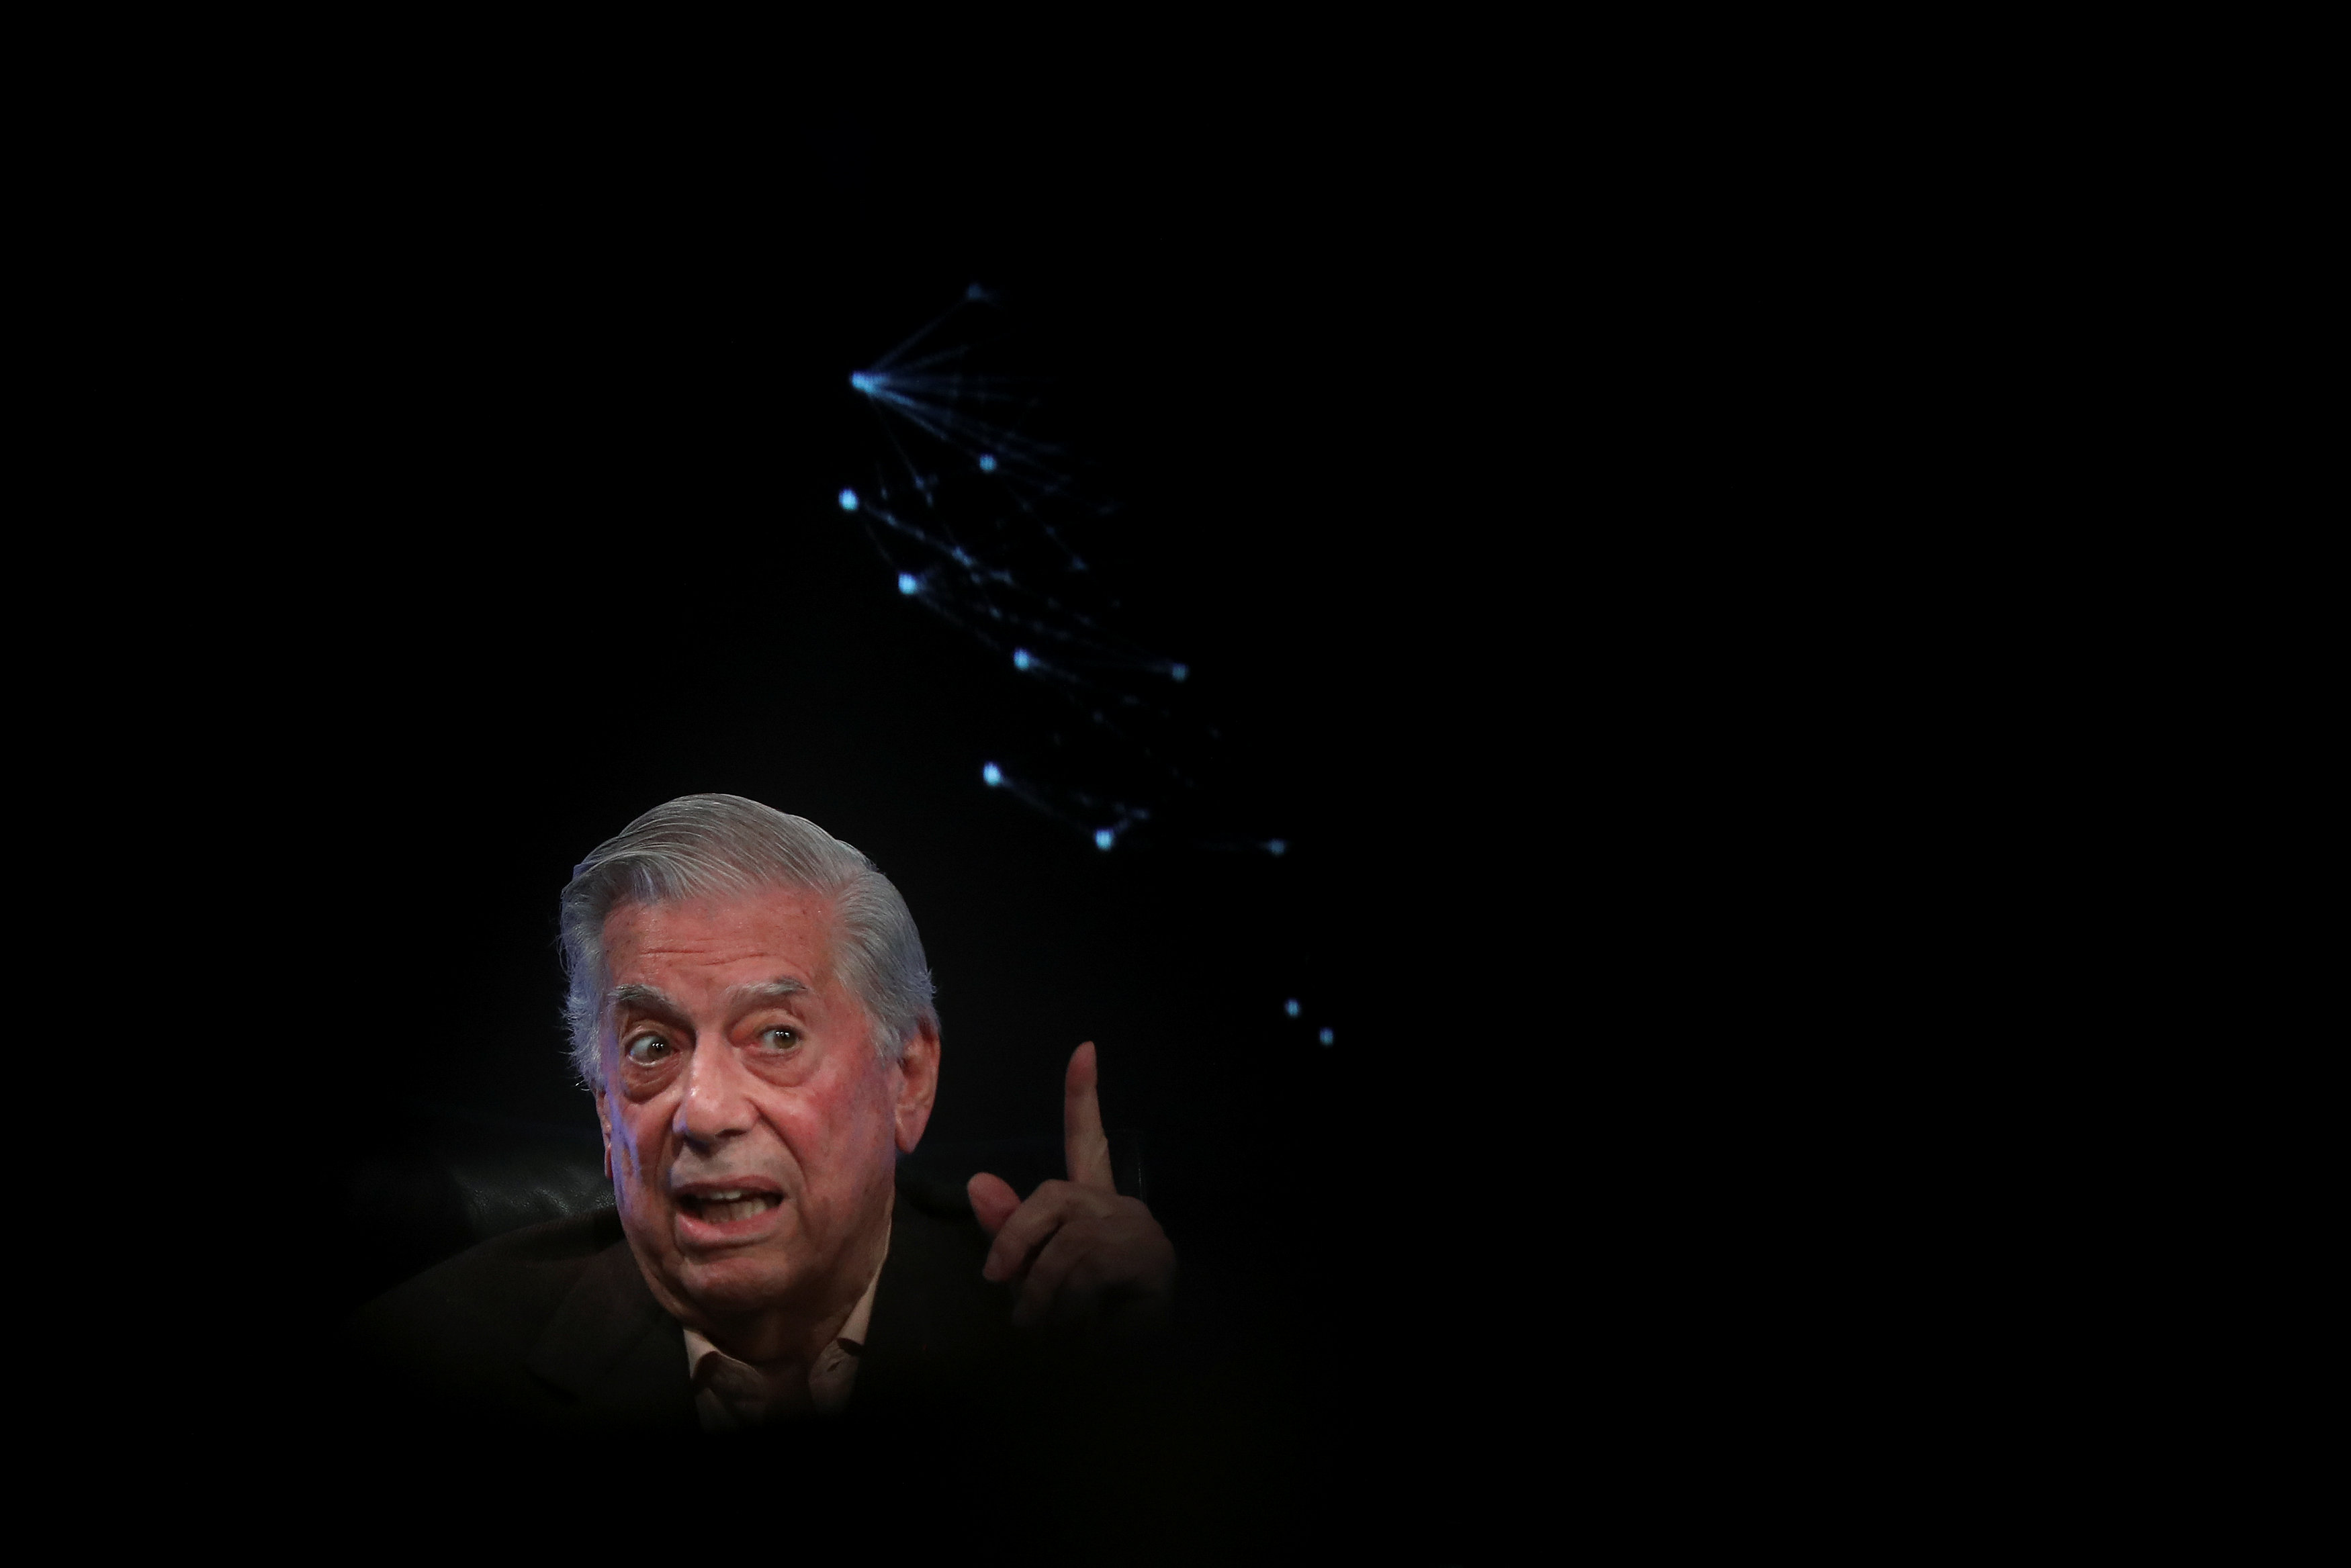 Mario Vargas Llosa, Peruvian writer and recipient of the 2010 Nobel Prize in Literature, speaks during the presentation of his book 